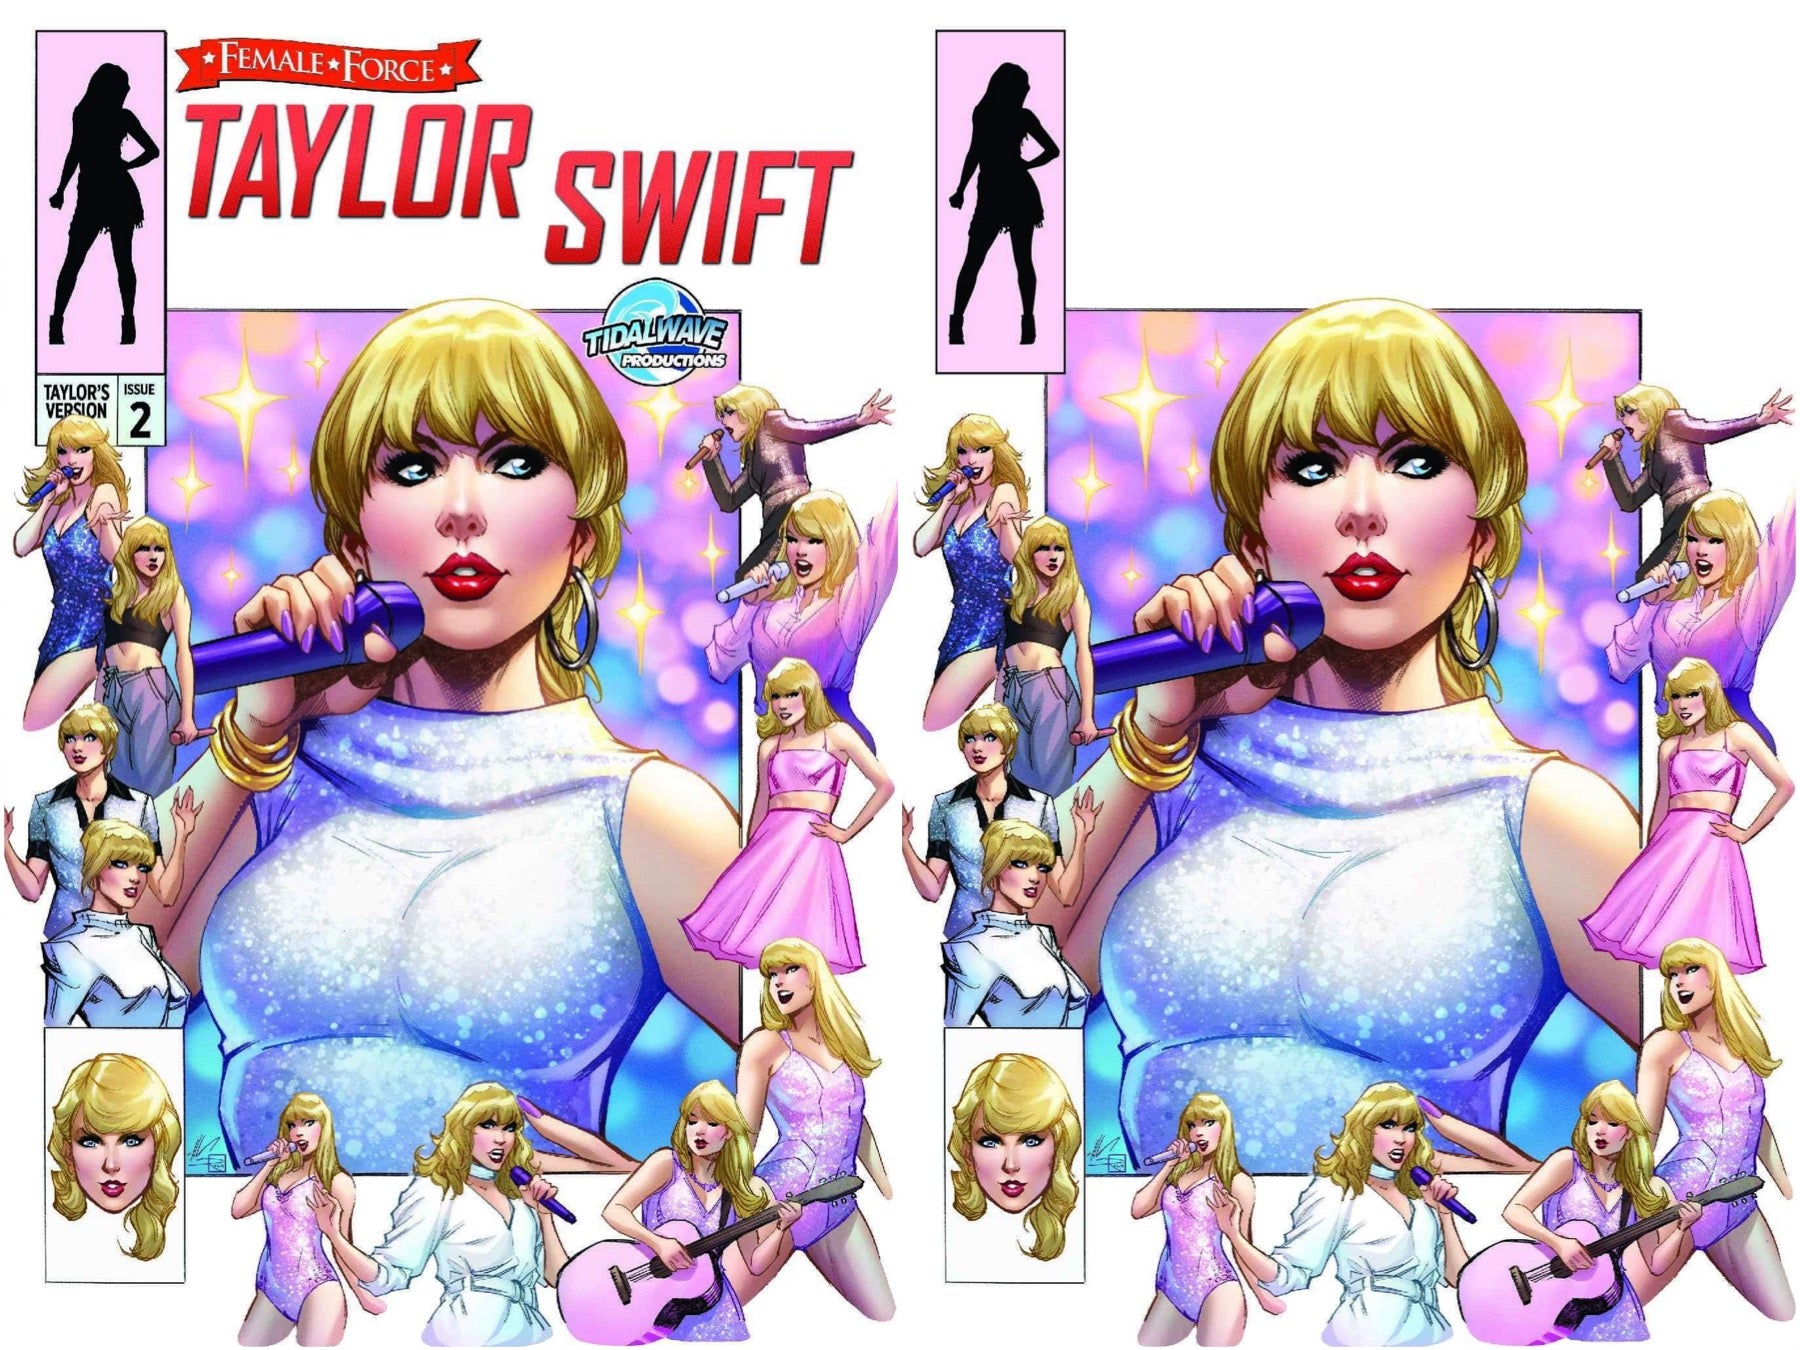 FEMALE FORCE: TAYLOR SWIFT #2 ALE GARZA VARIANT OPTIONS